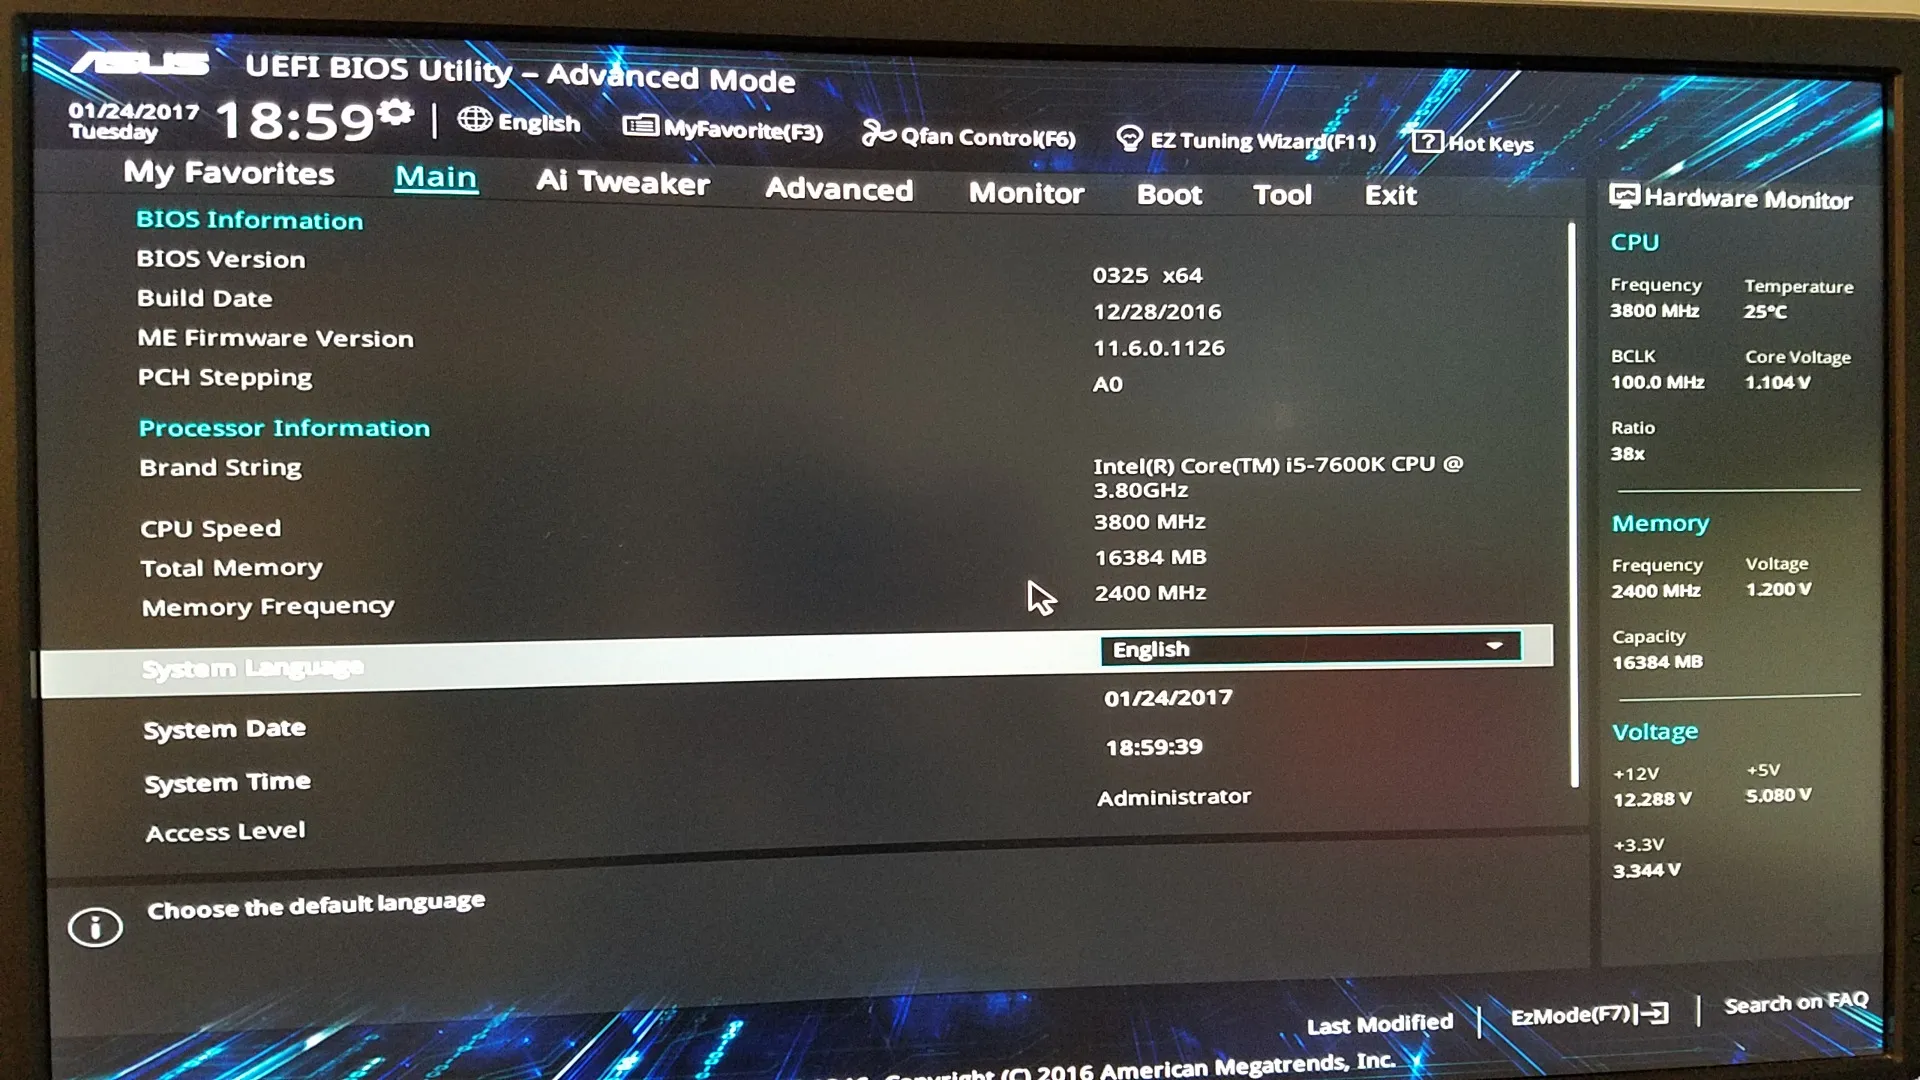 Fwupd 1.8.4 Supports More Hardware, Starts Allowing To Make BIOS Changes From Linux